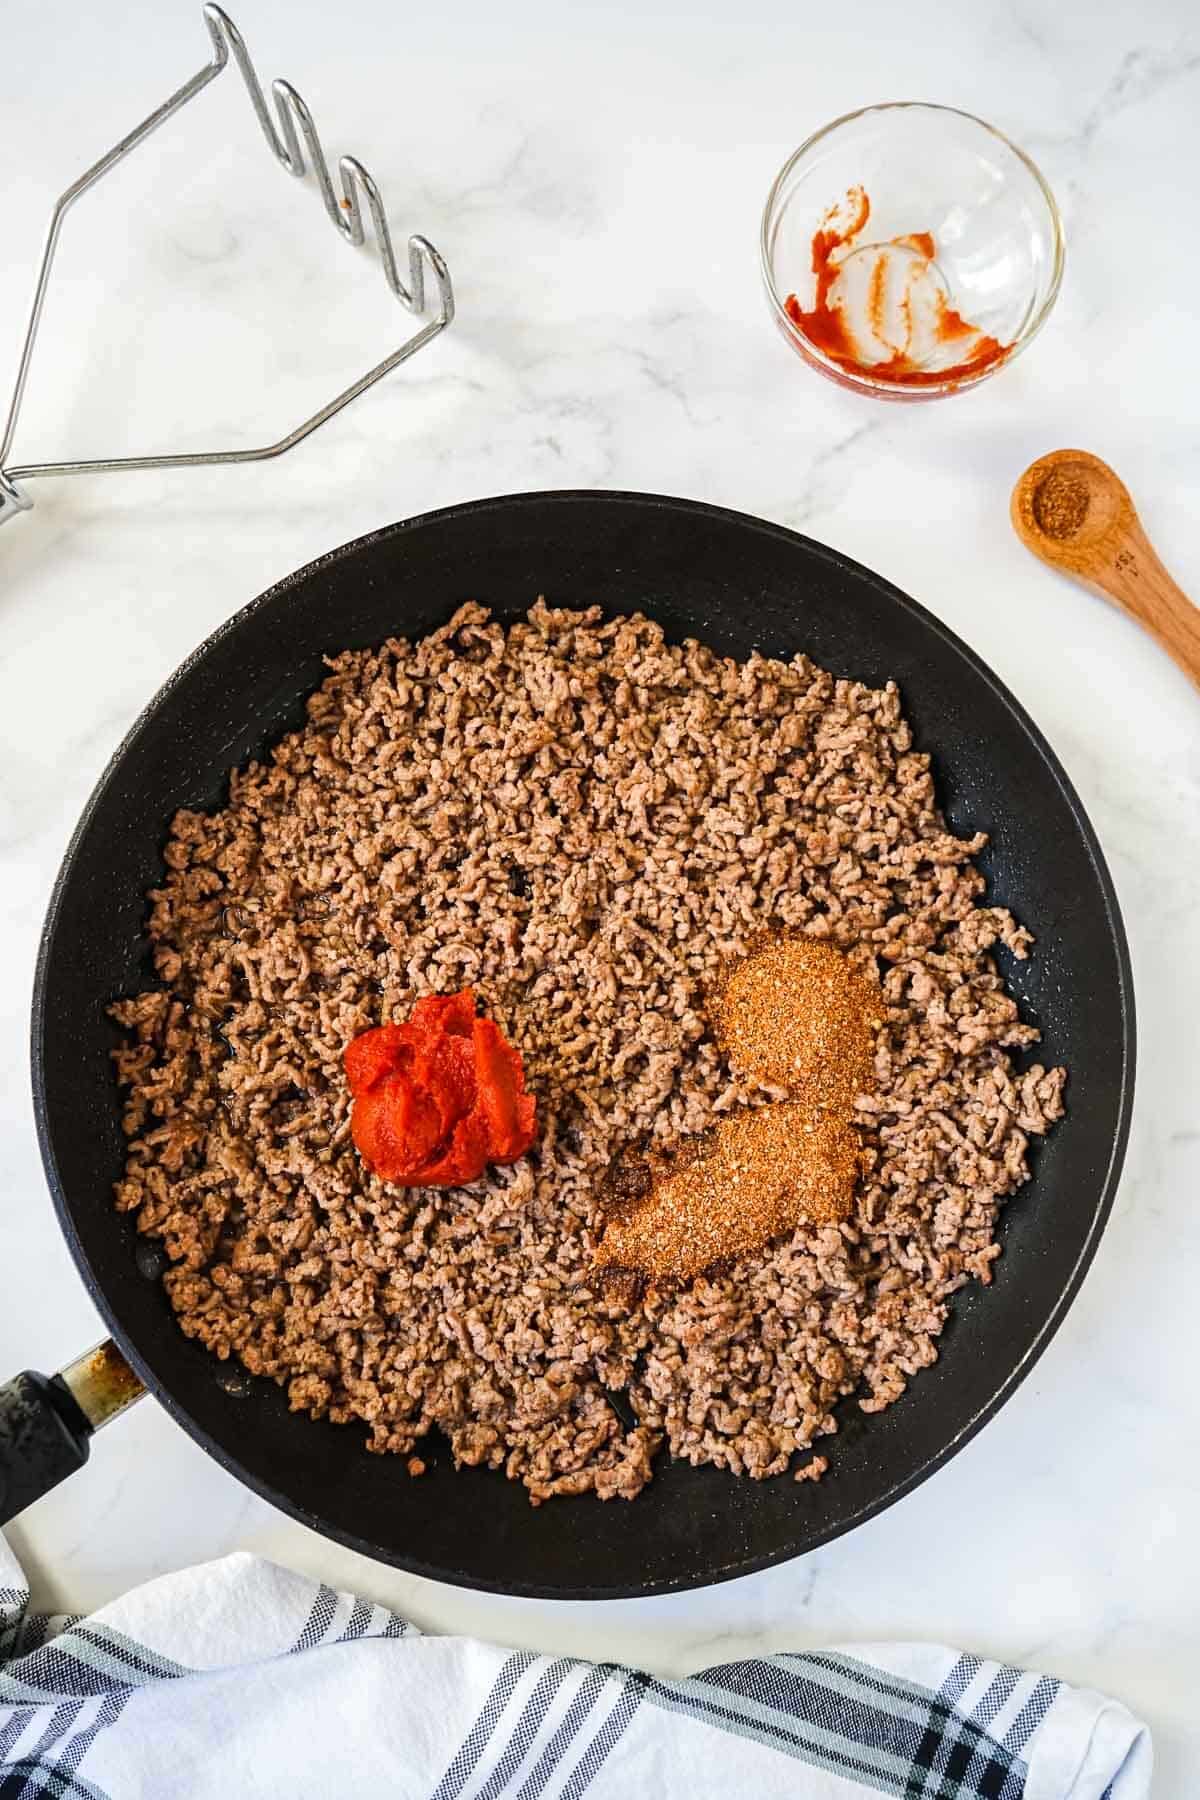 Cooked meat in a skillet with homemade taco seasoning being added along with tomato paste.